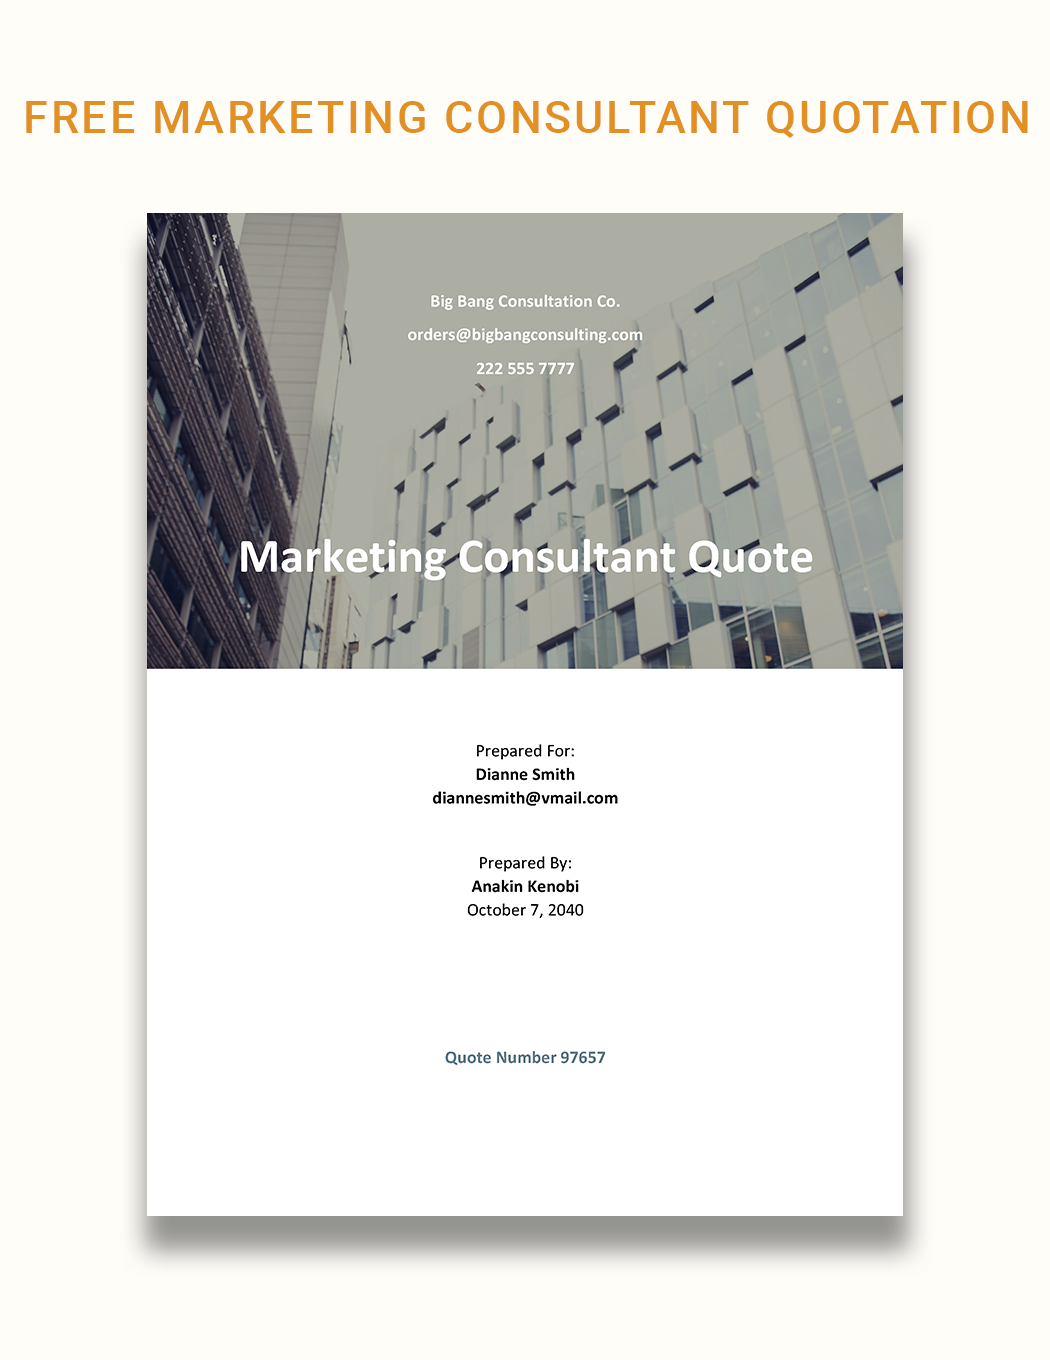 Marketing Consultant Quotation Template